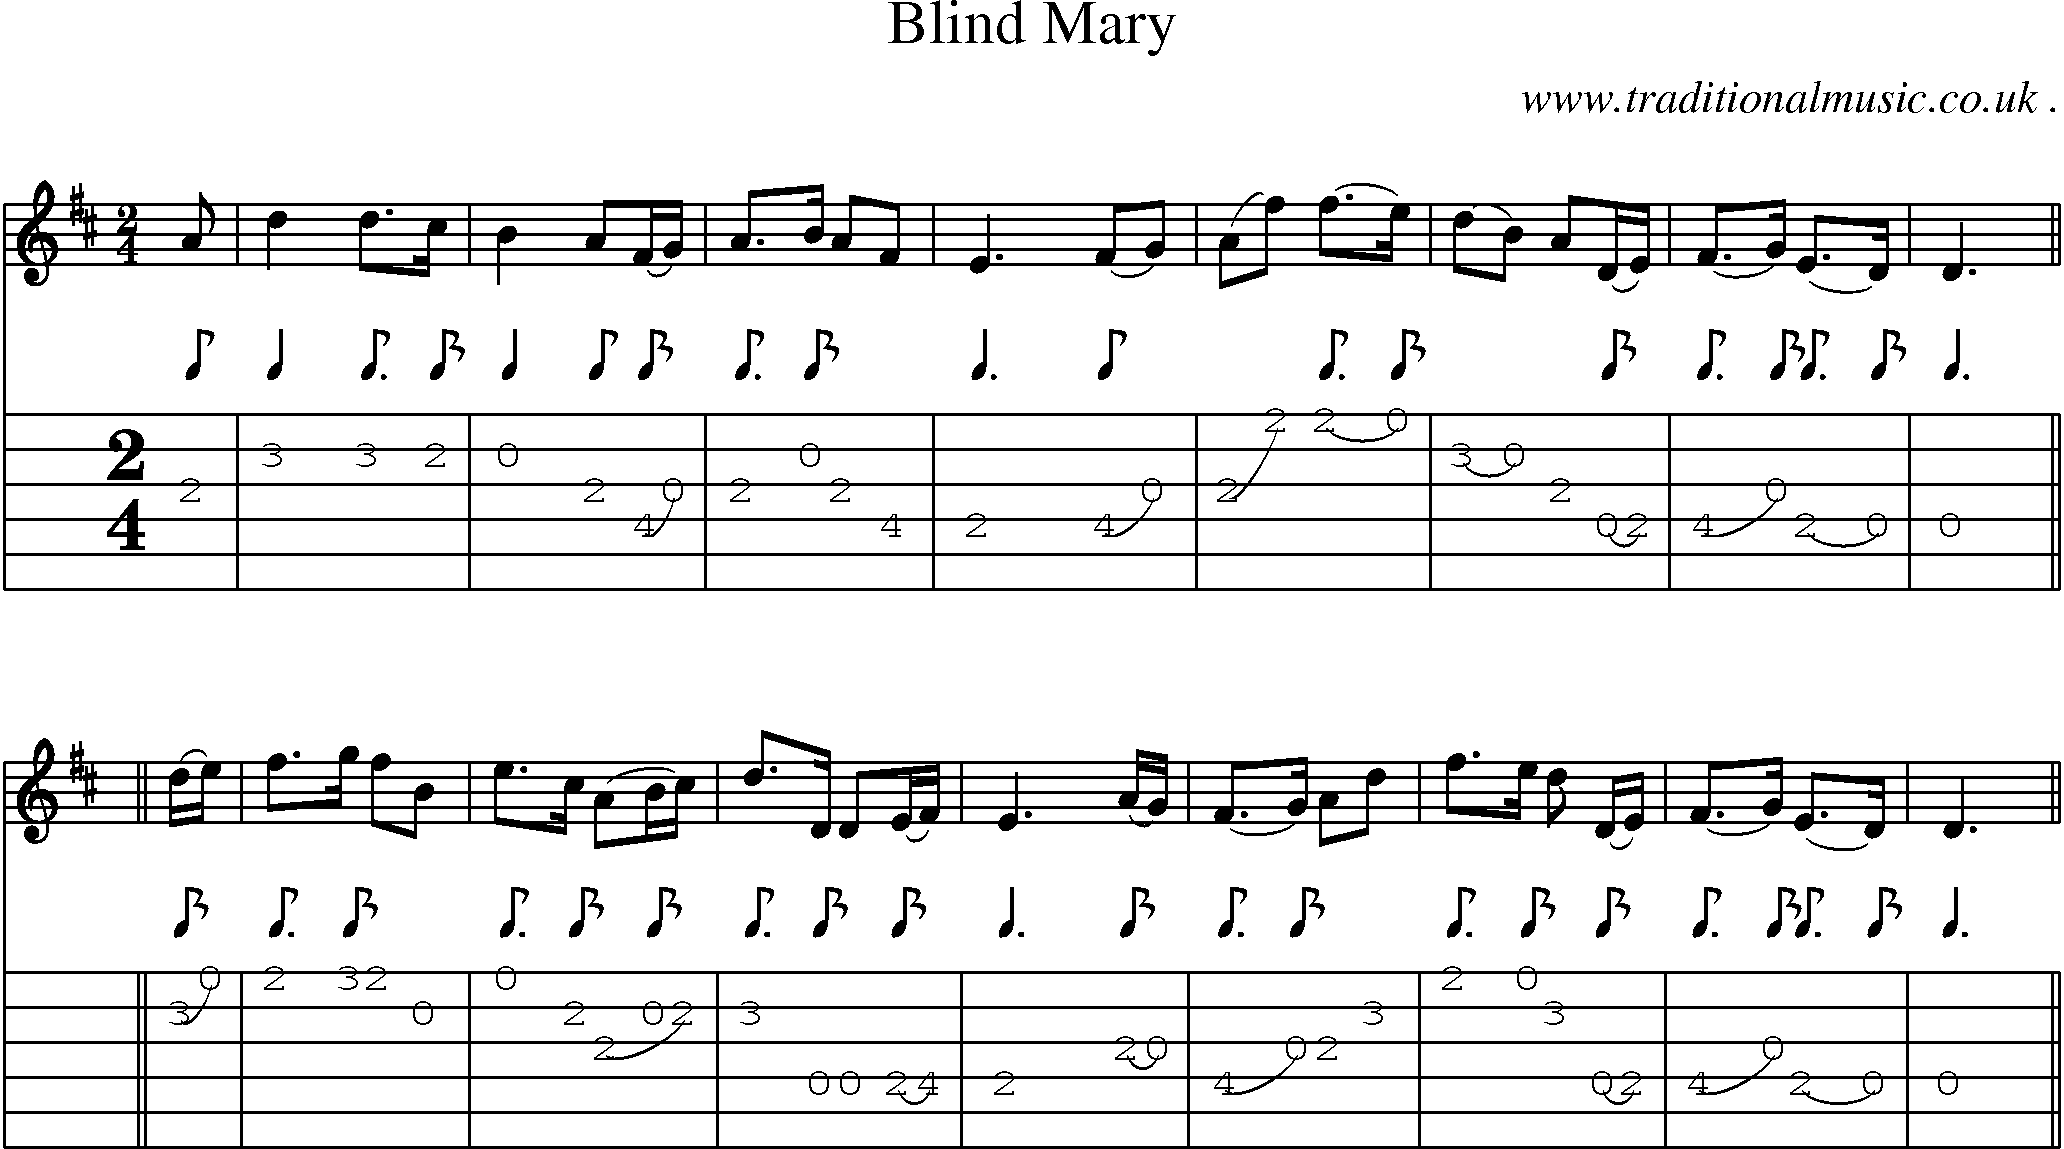 Sheet-Music and Guitar Tabs for Blind Mary